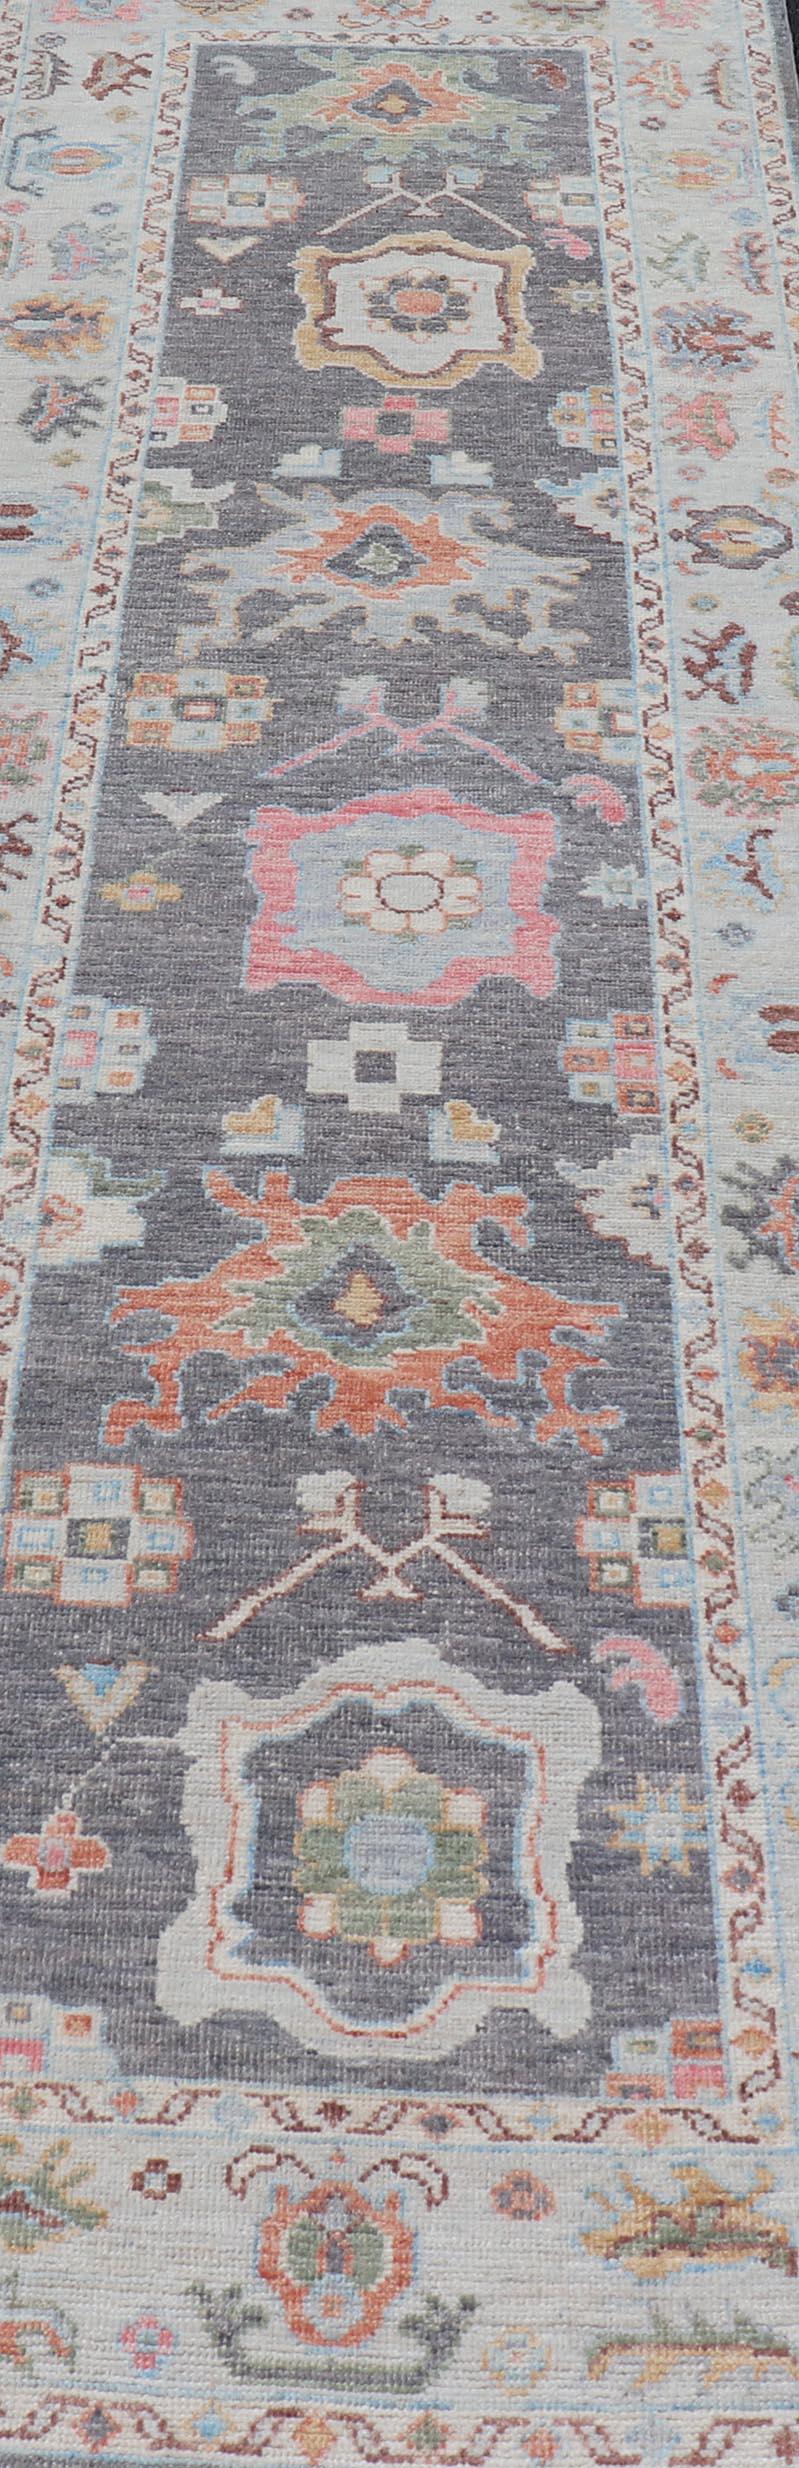 This Afghan Oushak runner features a grand motif, showcasing from the border to the field with a vibrant elegance that pops against the light blue-gray border, as well as the charcoal gray background throughout the center. The intricate details in